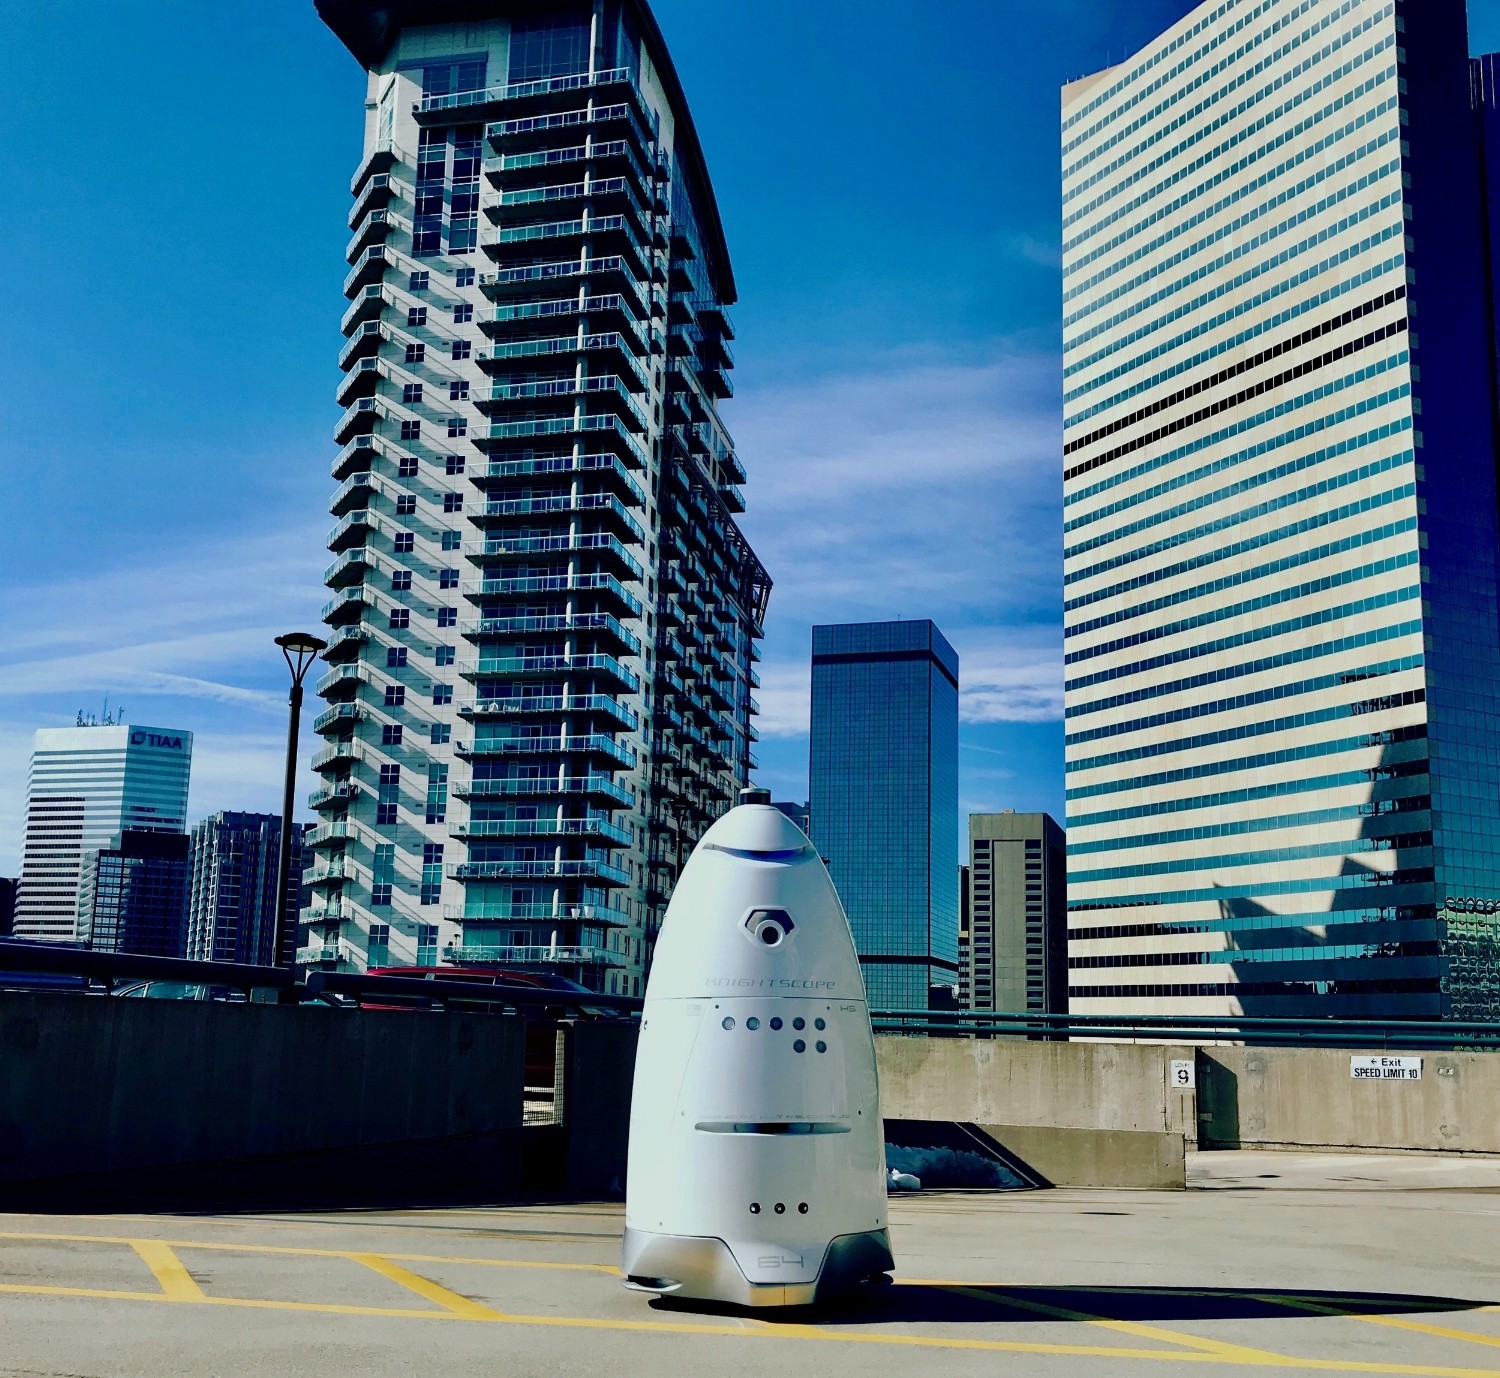 A real-life robotic crime-fighter, the Knightscope K5, is already in use by companies such as Microsoft and Uber in the United States, to patrol car parks and large outdoor areas.